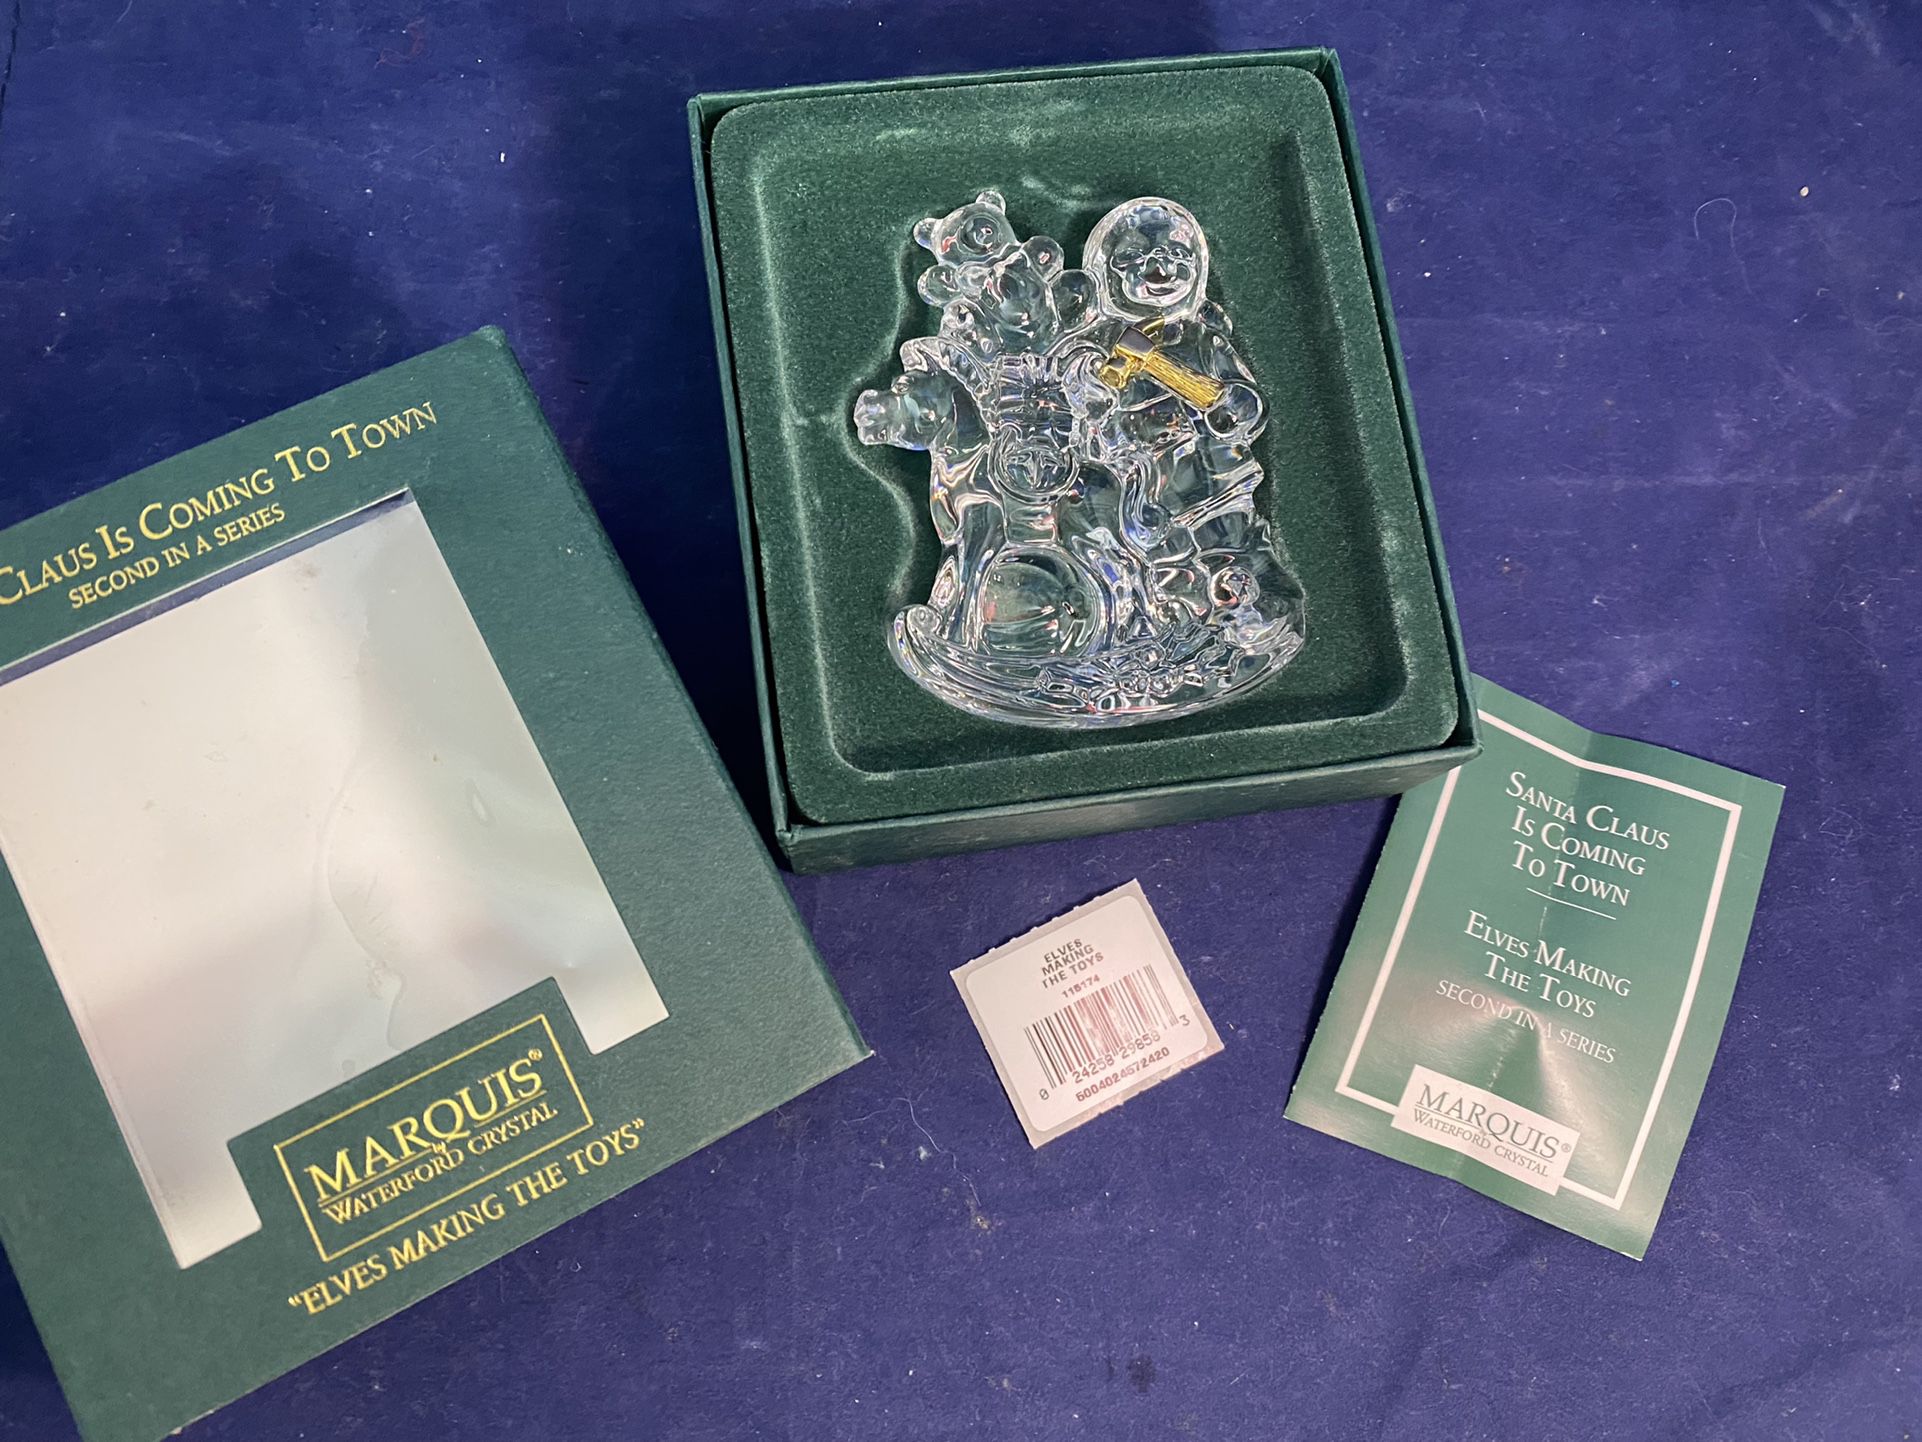 Marquis Waterford Christmas Ornament "Elves Making Toys"